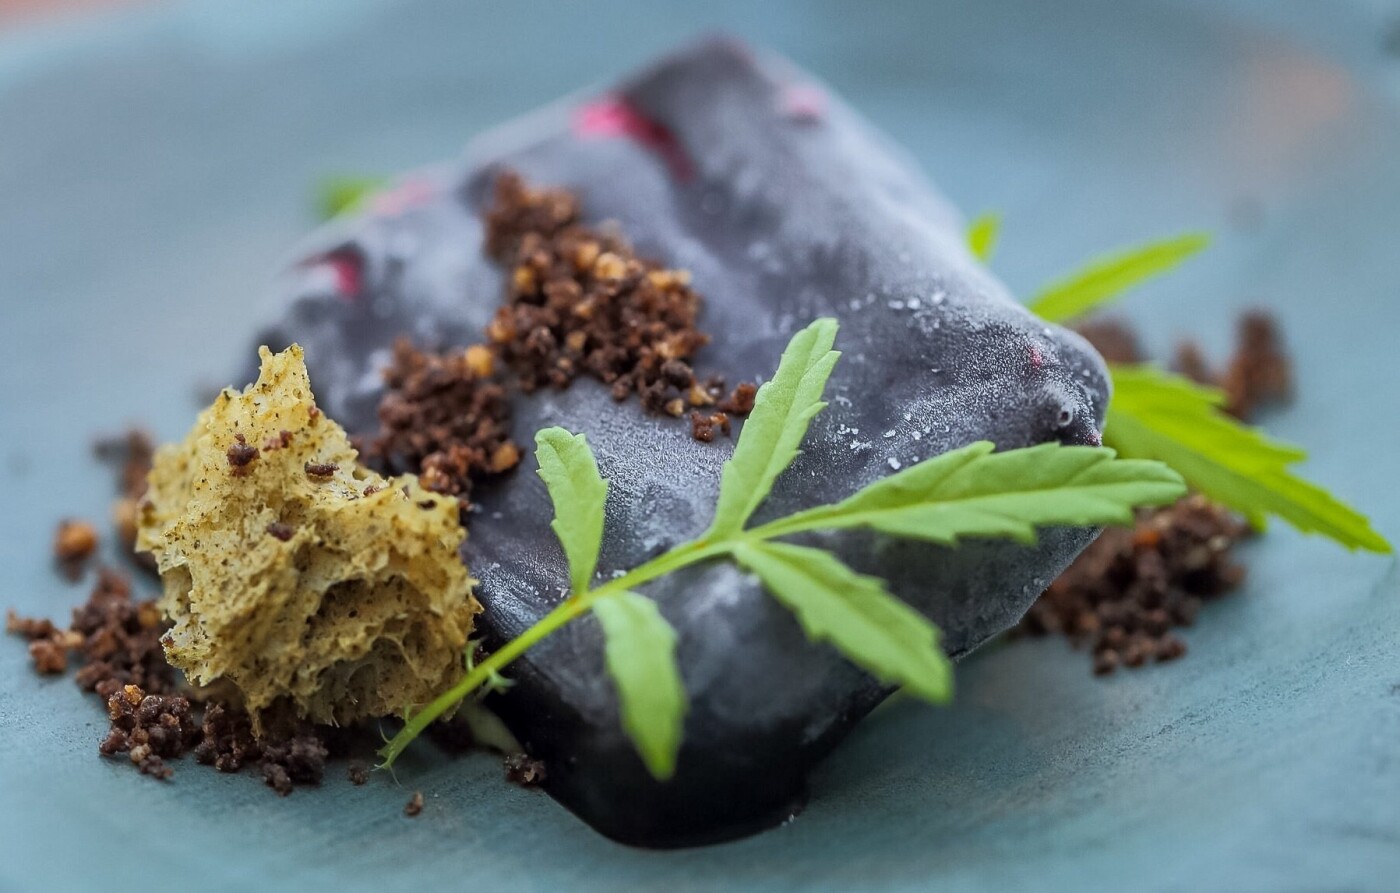 Picture taken at Lenclume restaurant in Cartmel, Lake District, United Kingdom. Dessert dish is Beetroot slate ~ Apple Marigold and Cobnut. Picture taken only with available natural light.